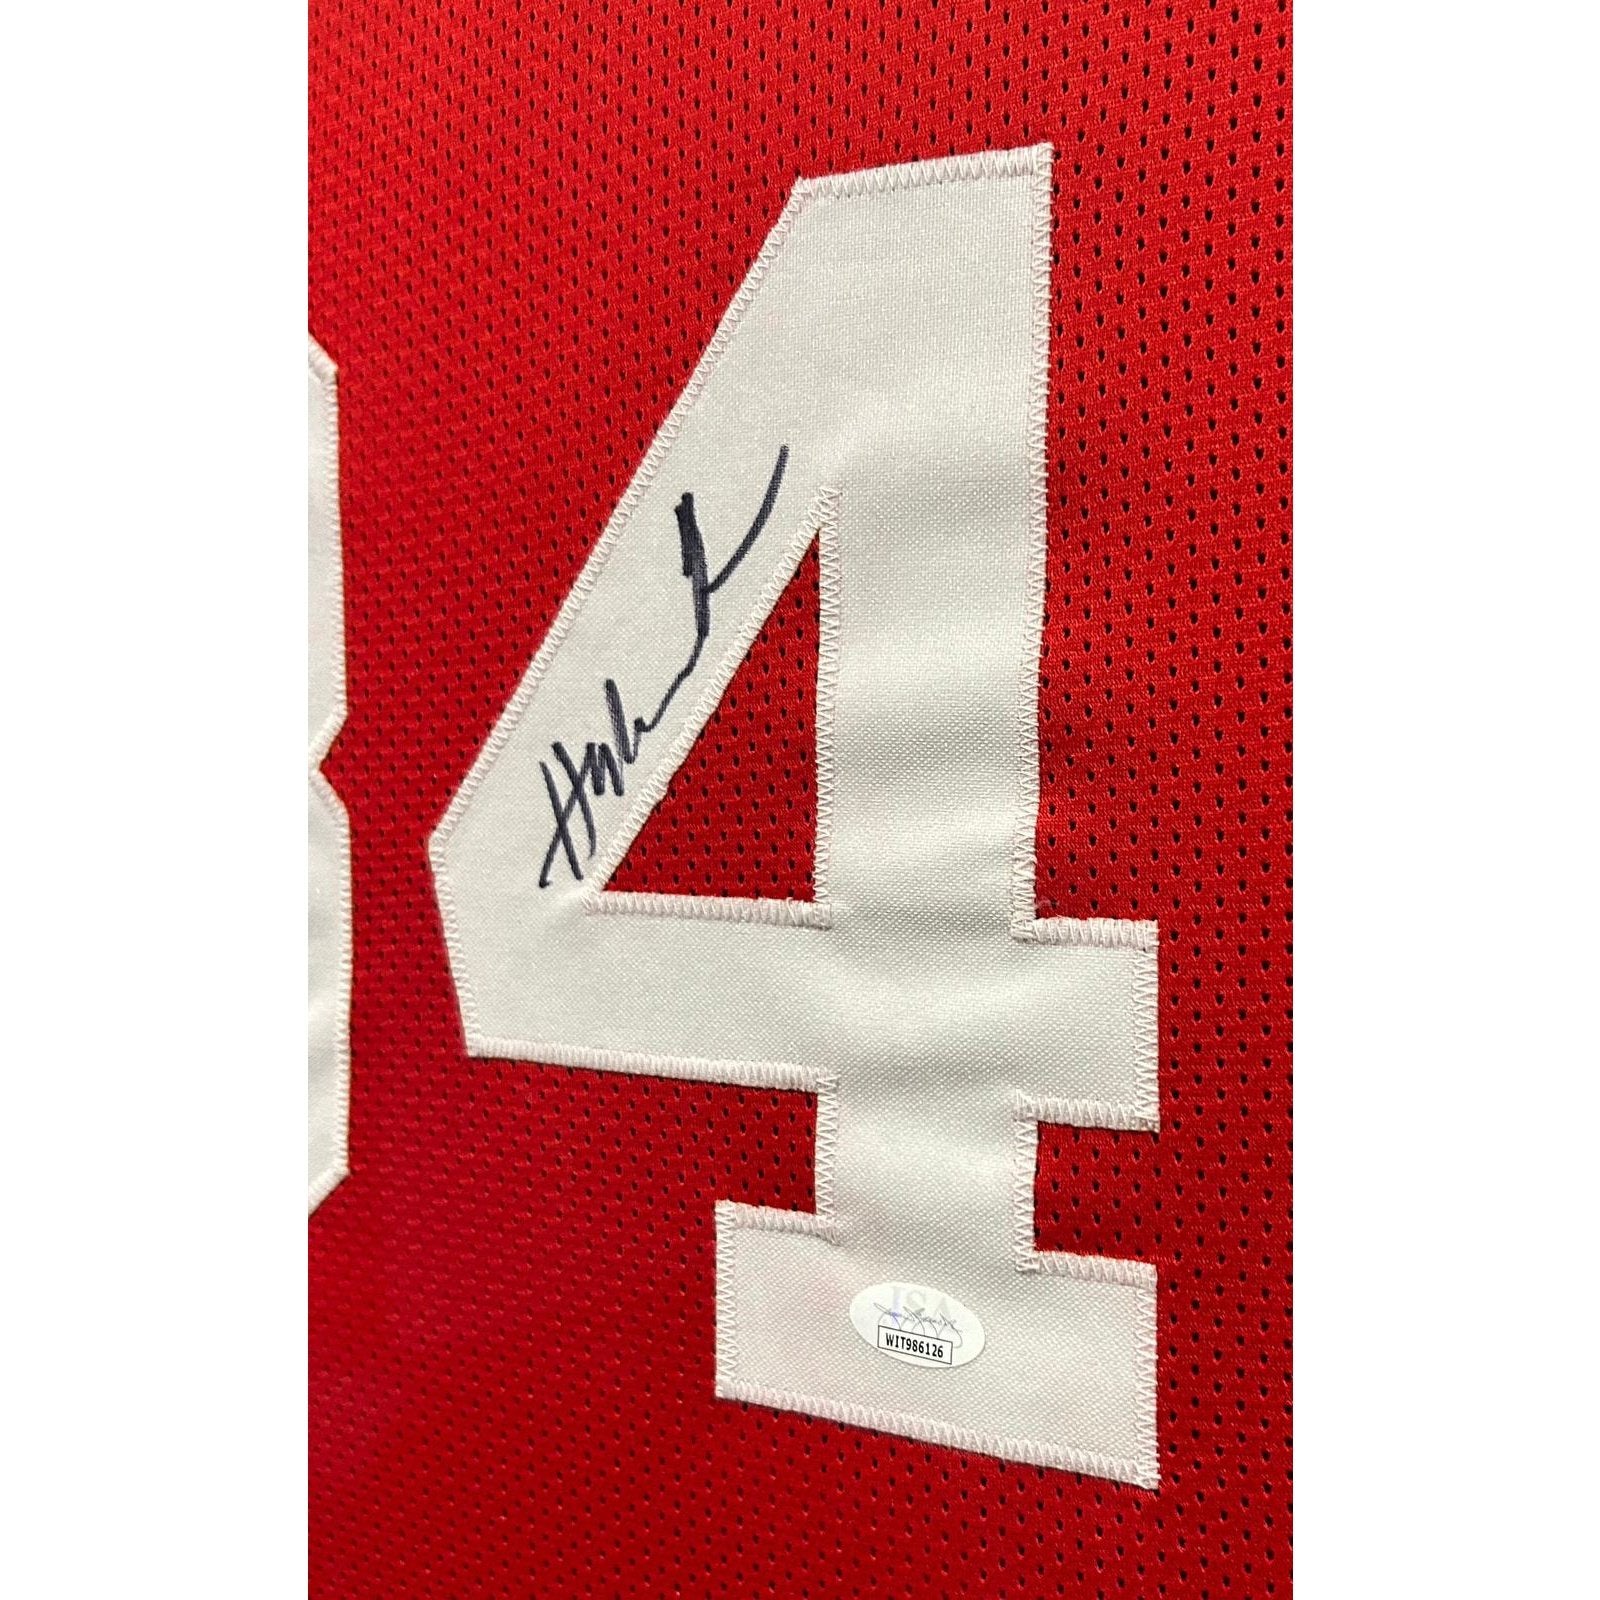 Hakeem Olajuwon Autographed and Framed Red Rockets Jersey